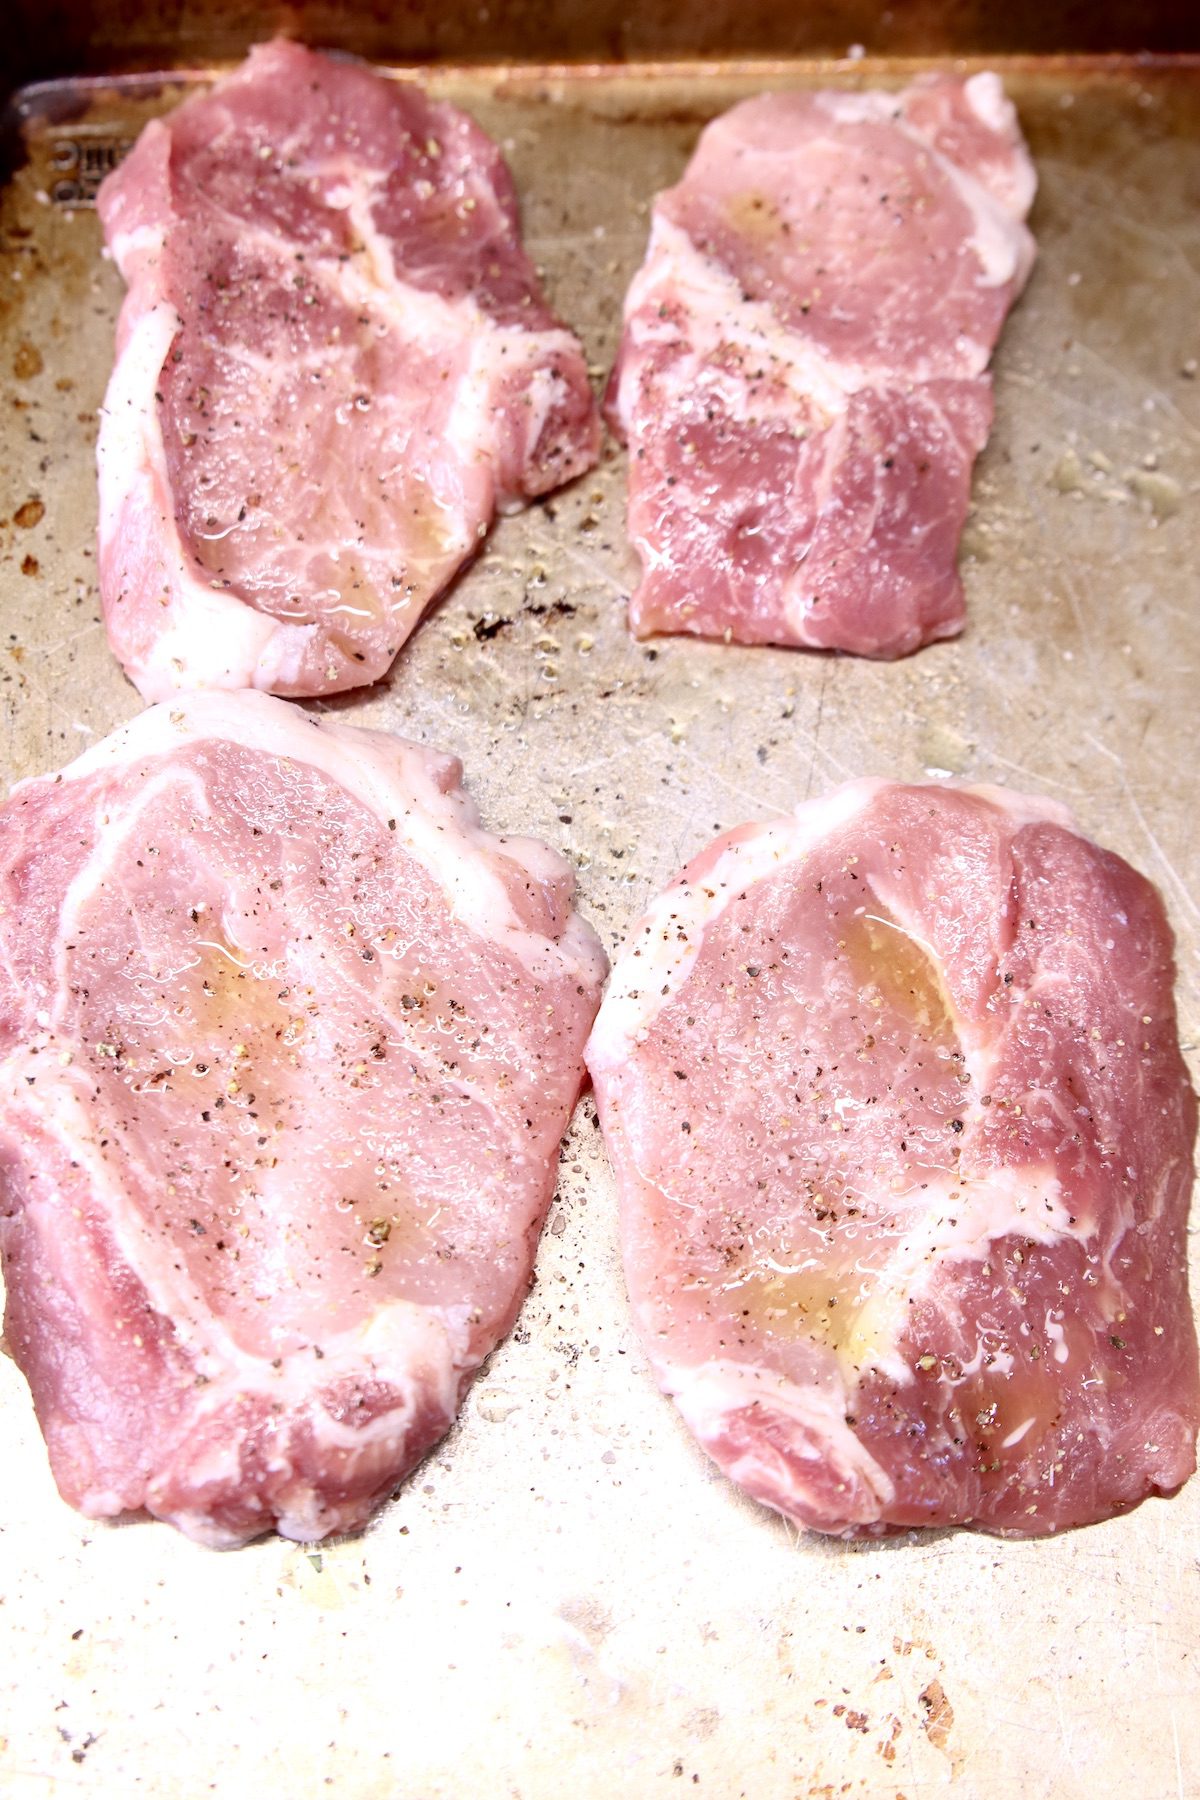 pork chops on a sheet pan - uncooked